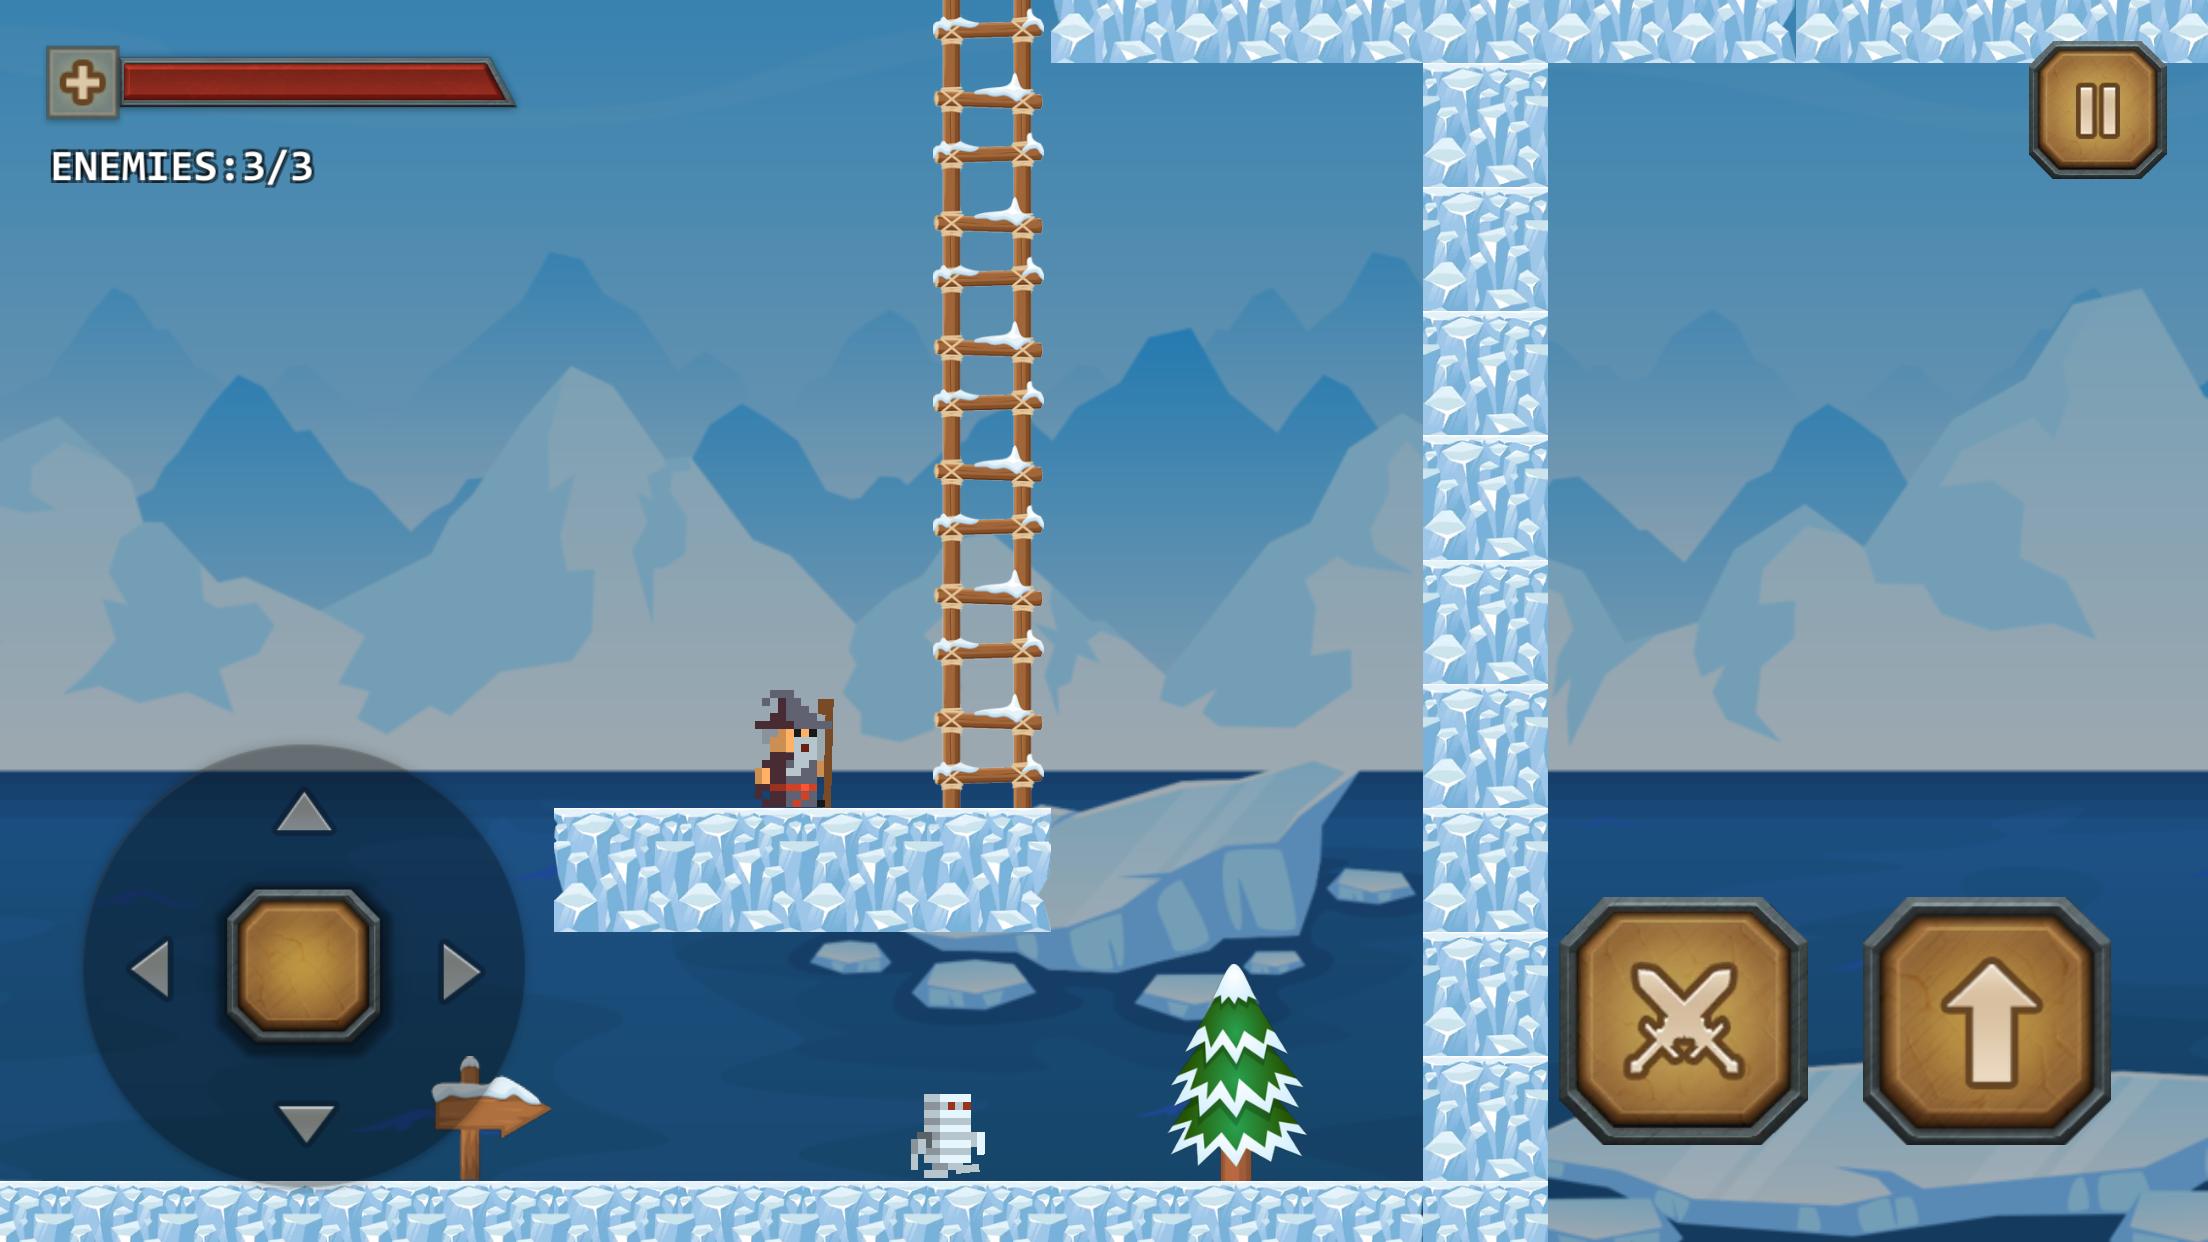 Epic Game Maker Create and Share Your Levels 1.9 Screenshot 17